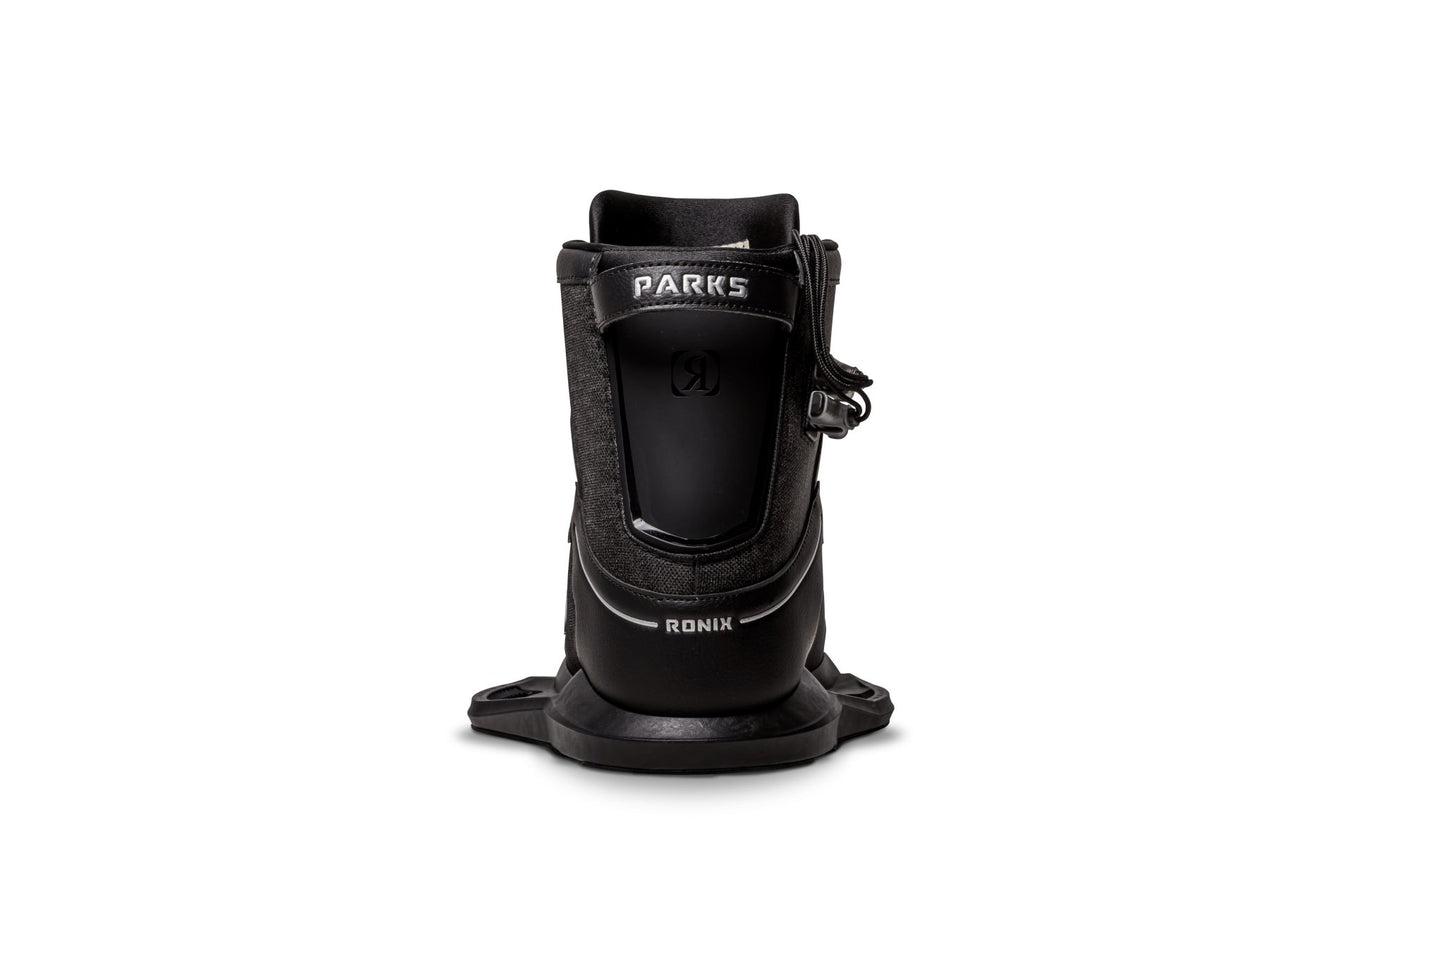 2023 Ronix Parks Boot -Ronix233080-Black / Reflective-6to7